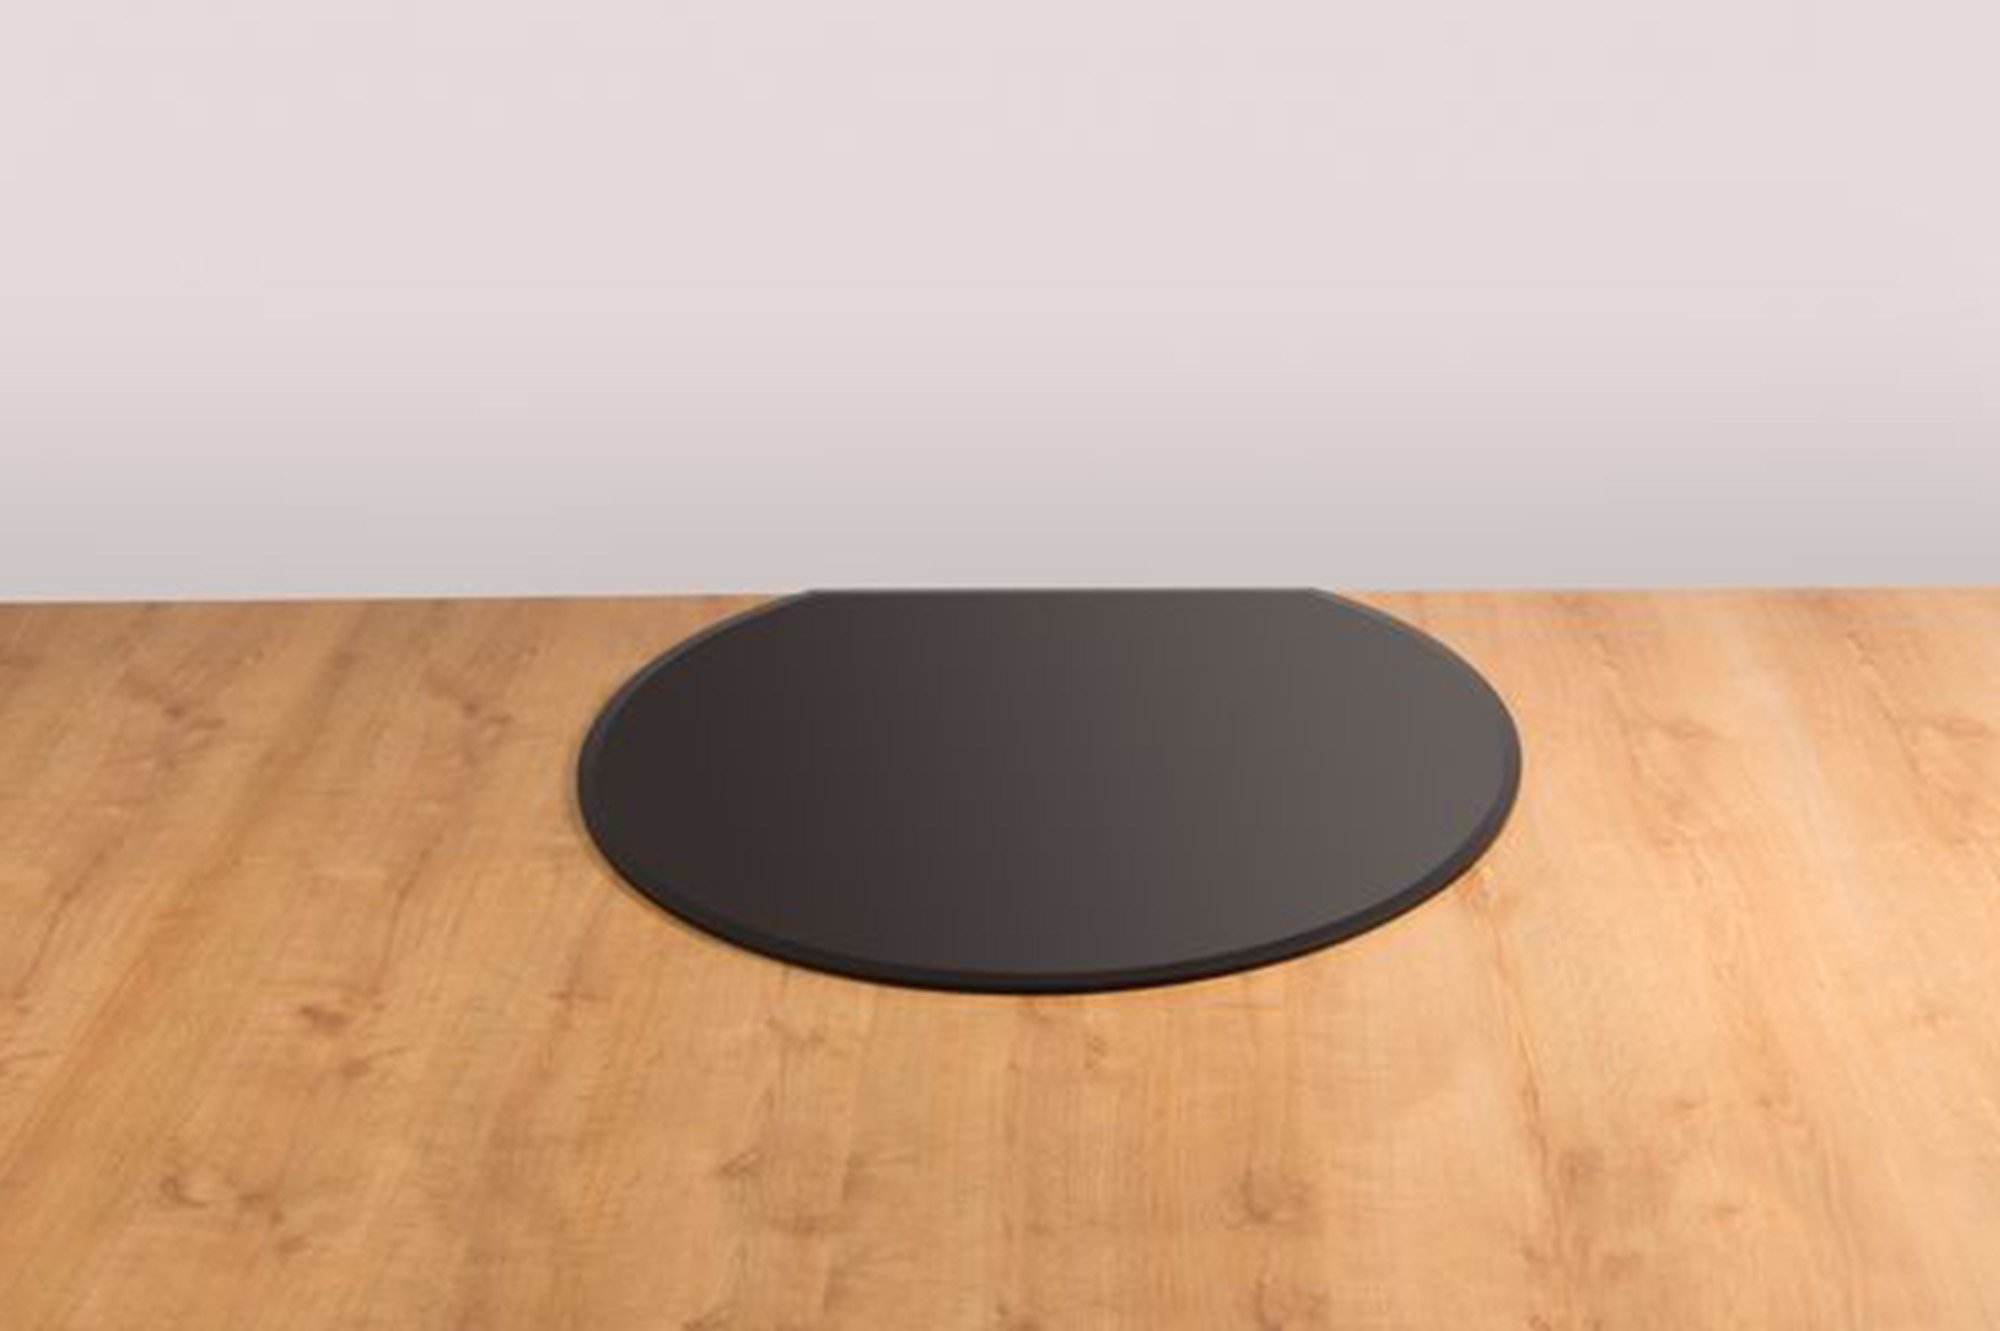 Package includes black glass hearth with flat back